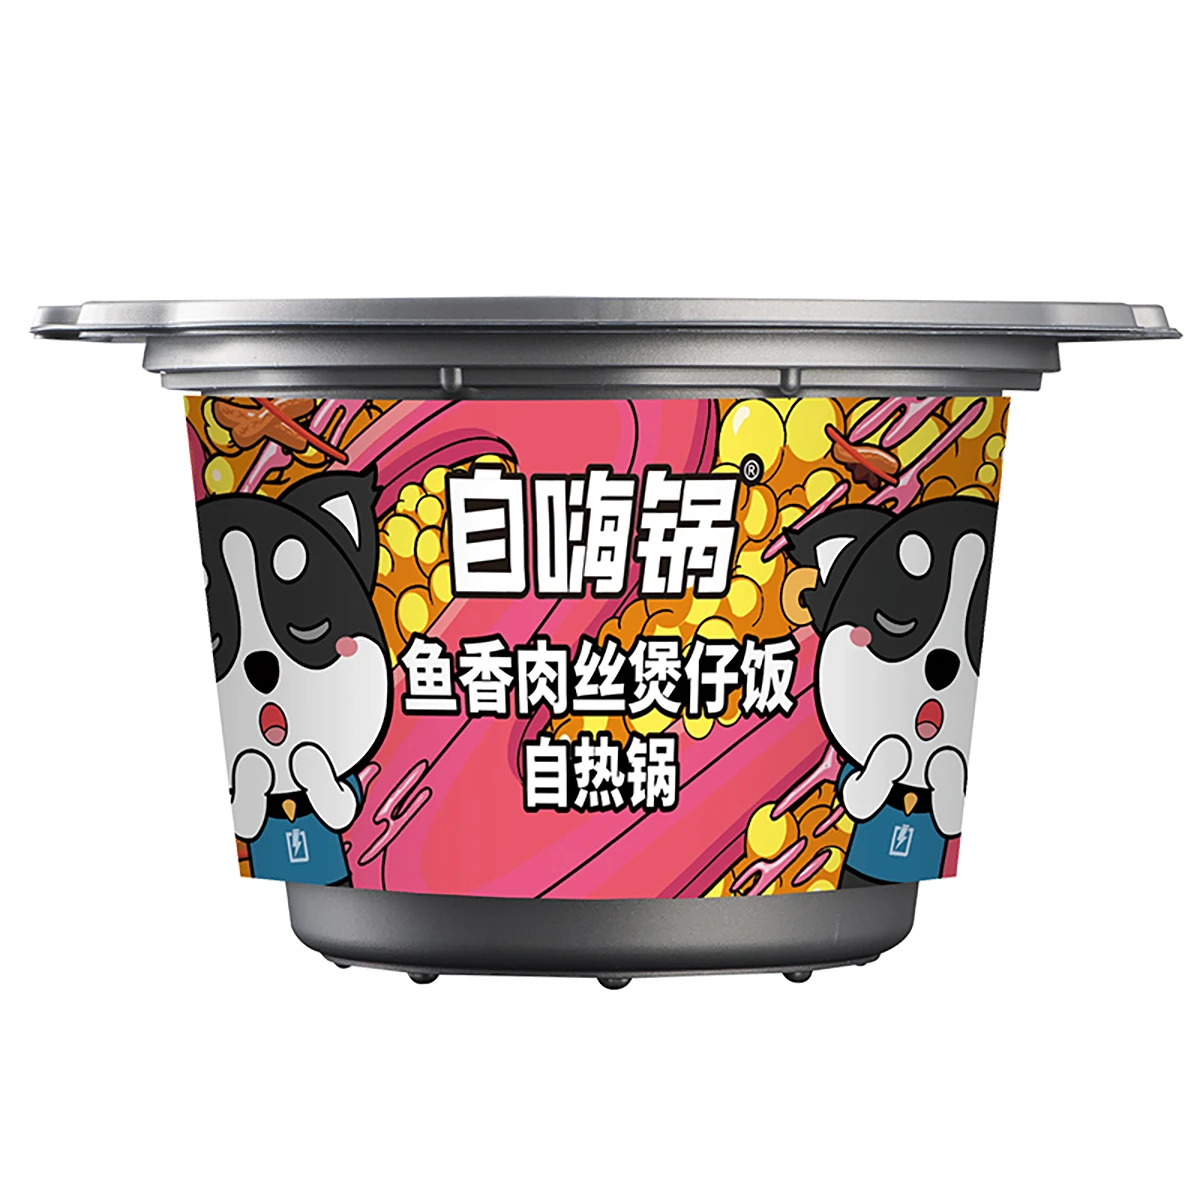 Zihaiguo self-heating hot pot combination sells shredded meat flavors of affordable family packs